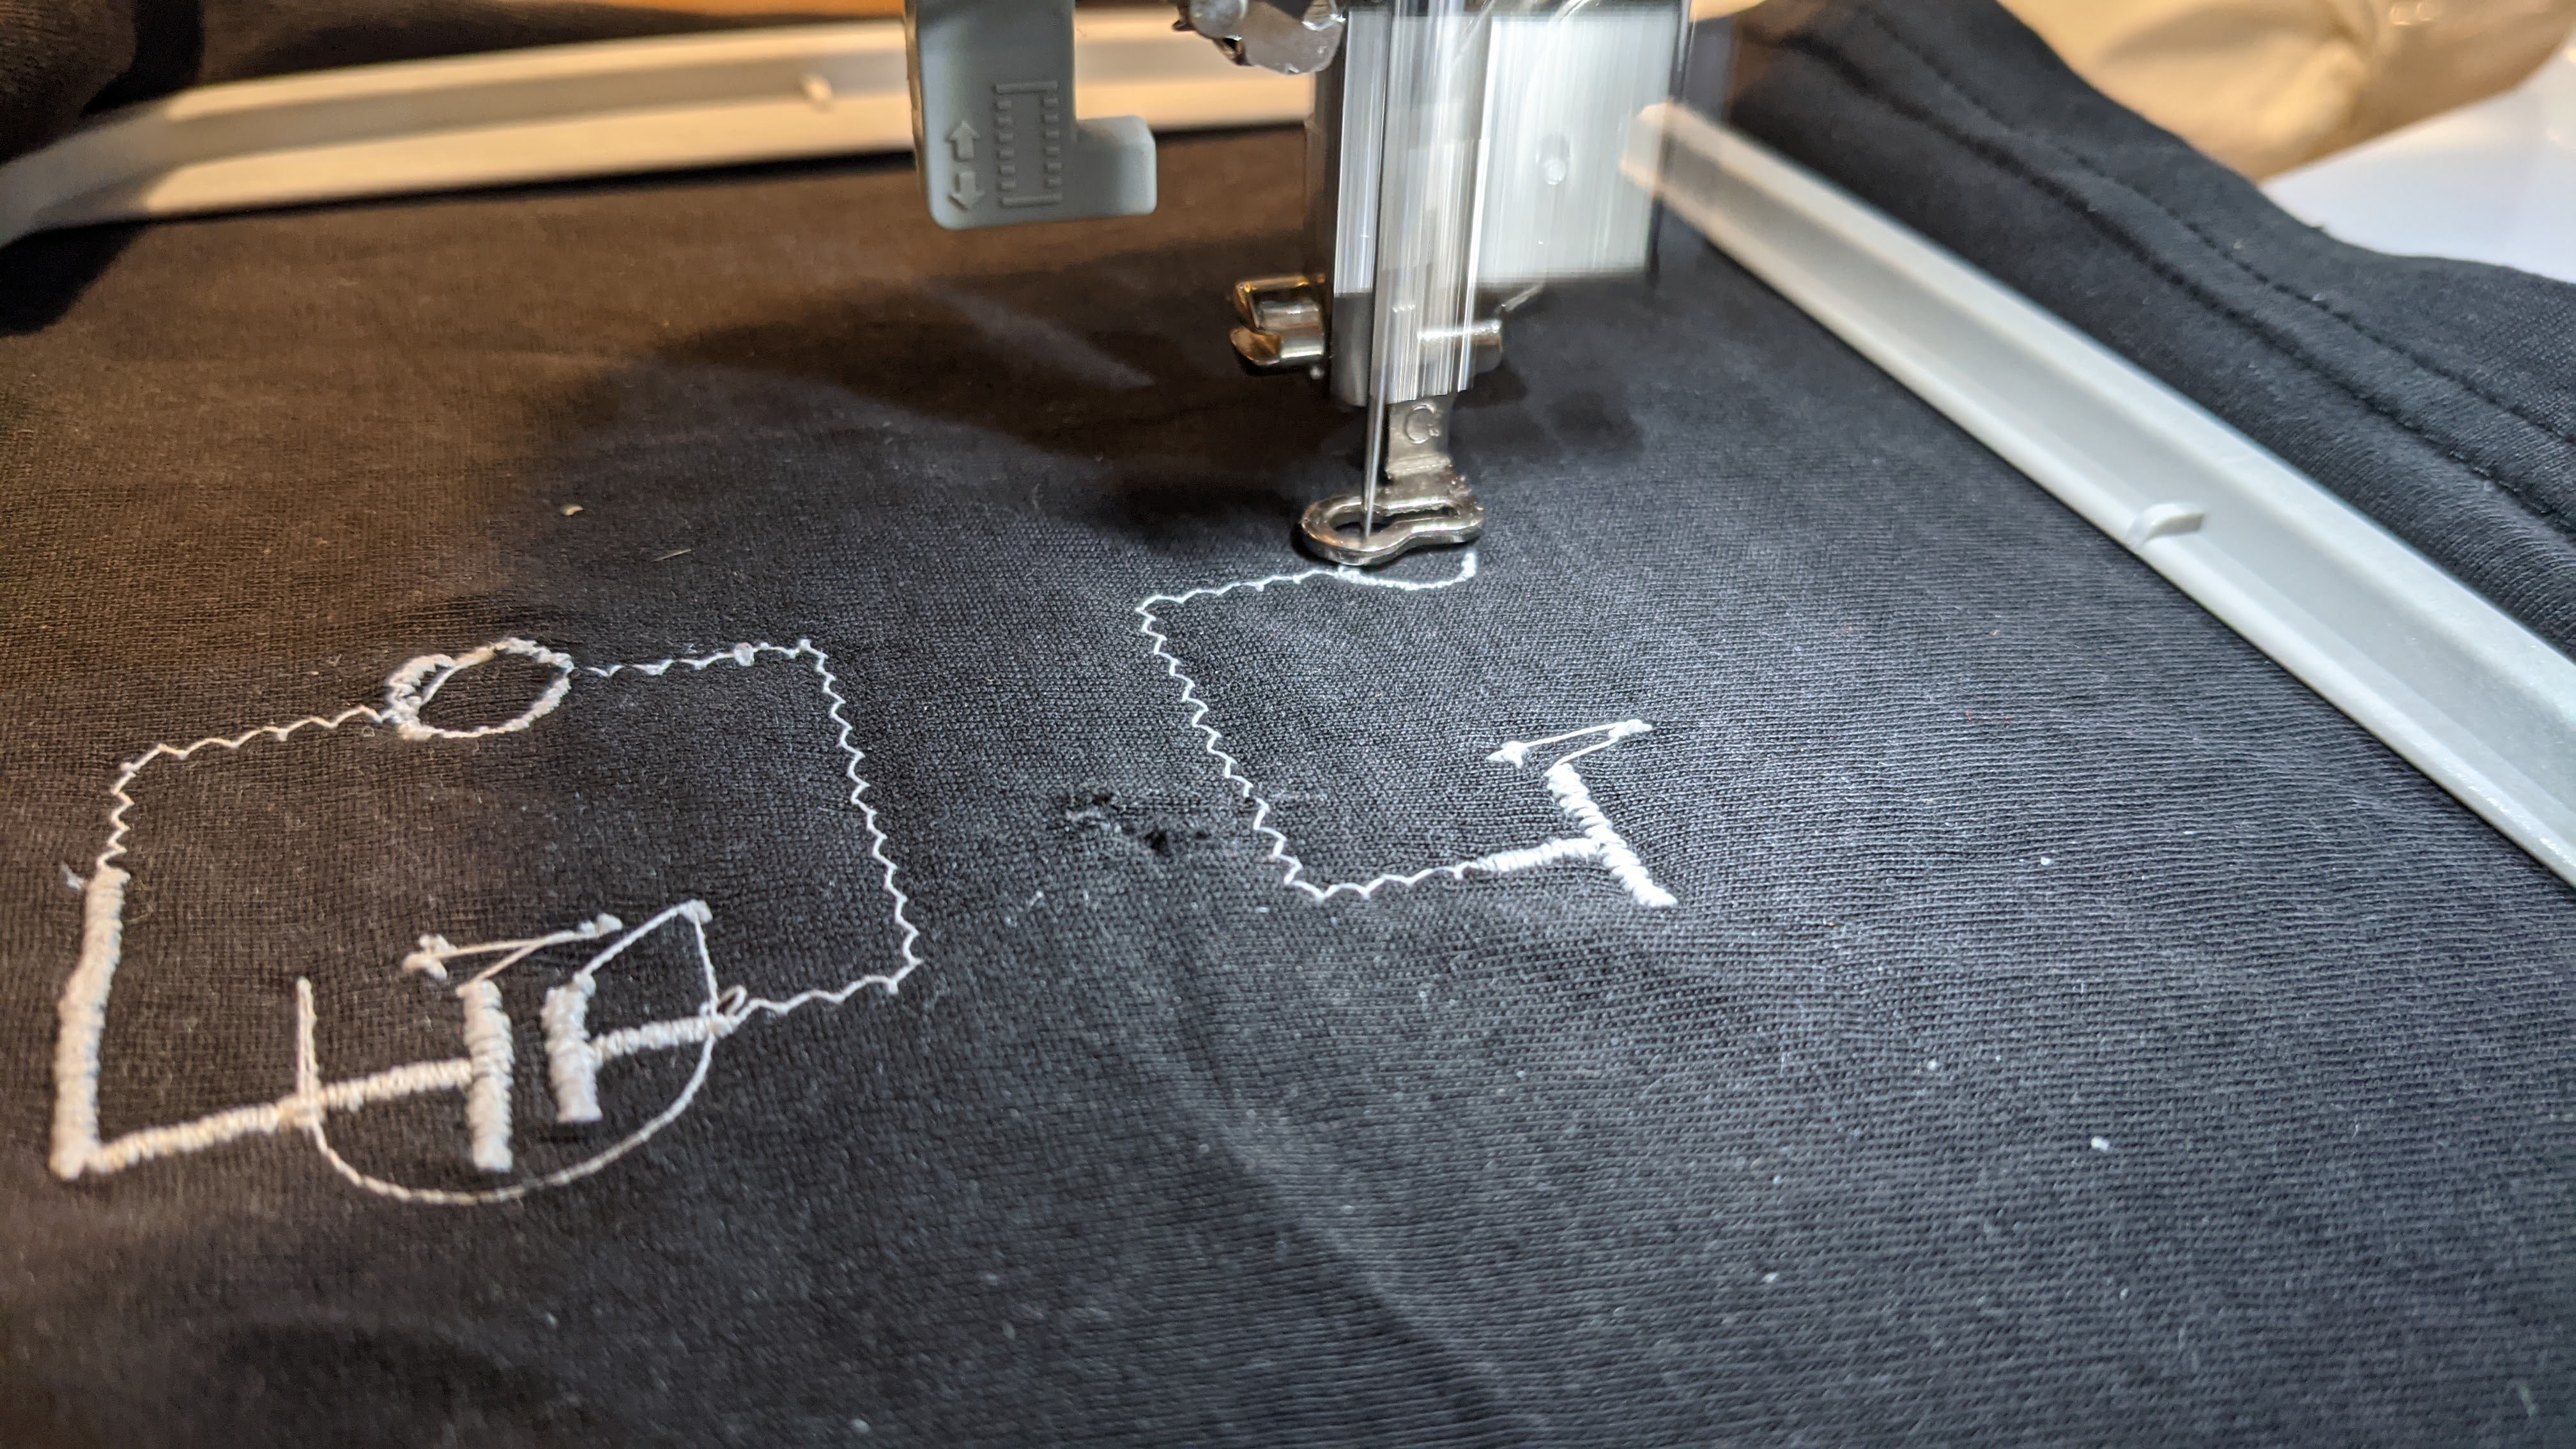 Stitching the first layer